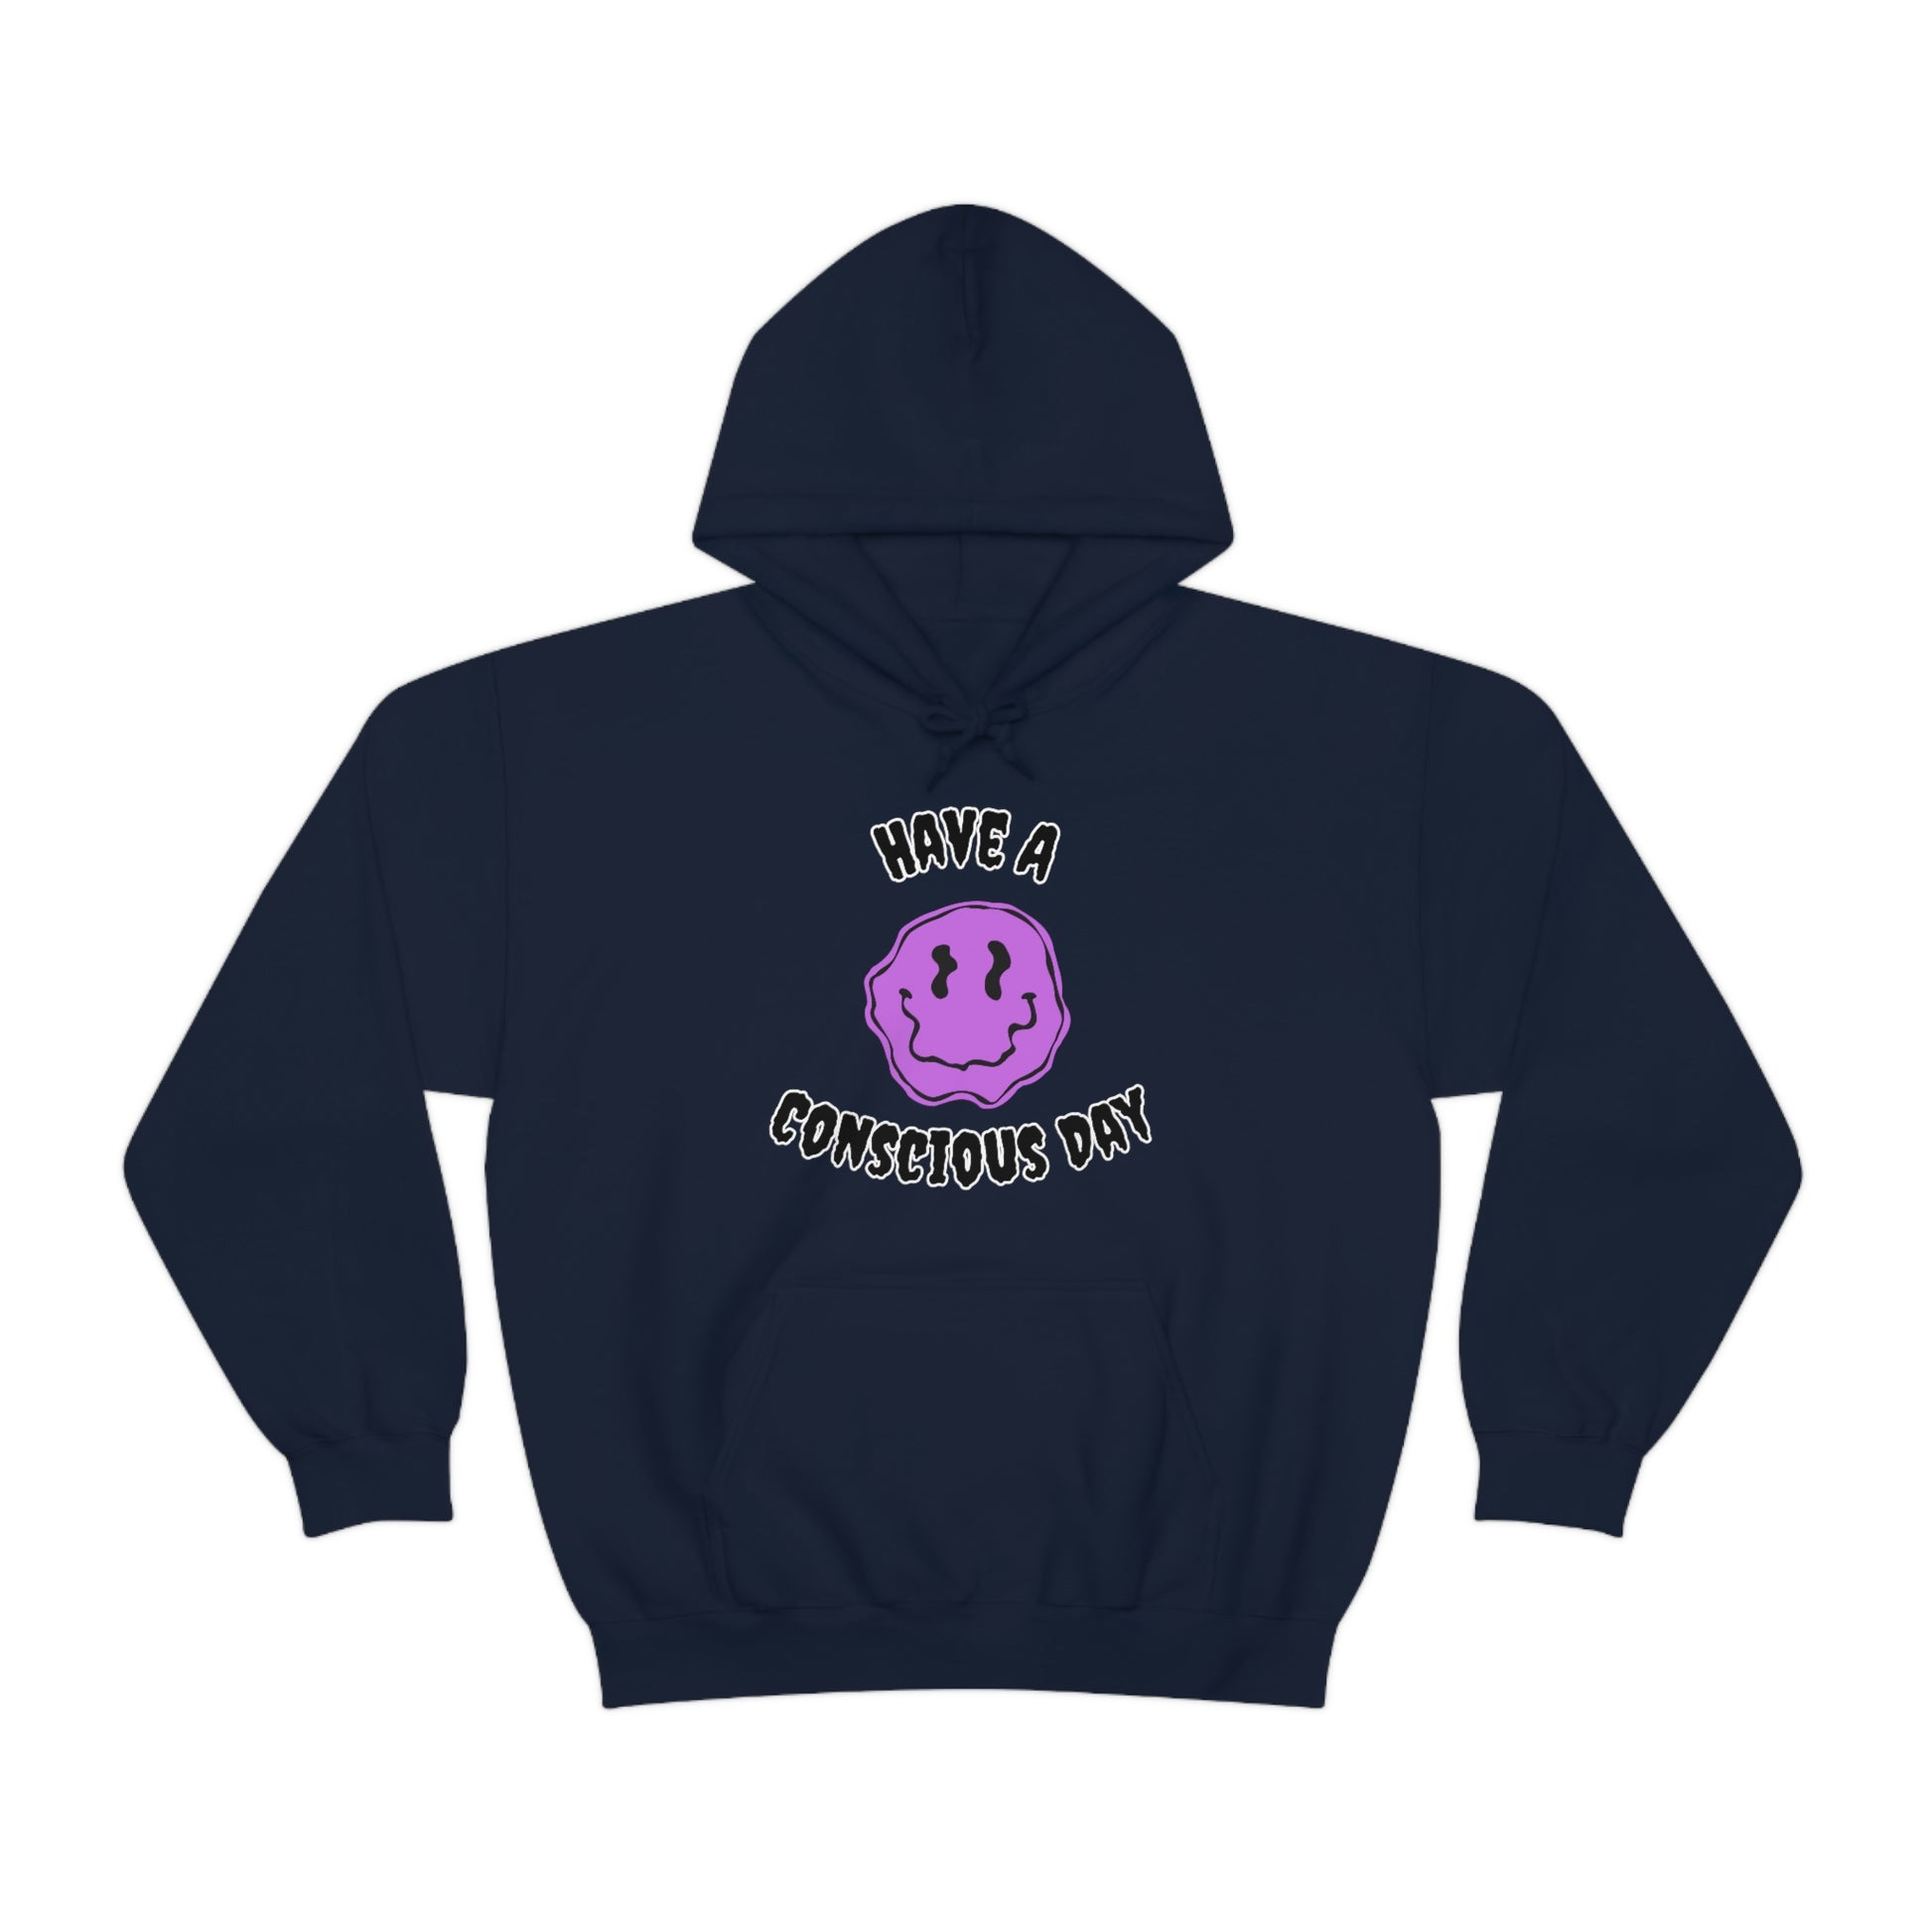 Conscious Day Hoodie - Conscious tees inc.